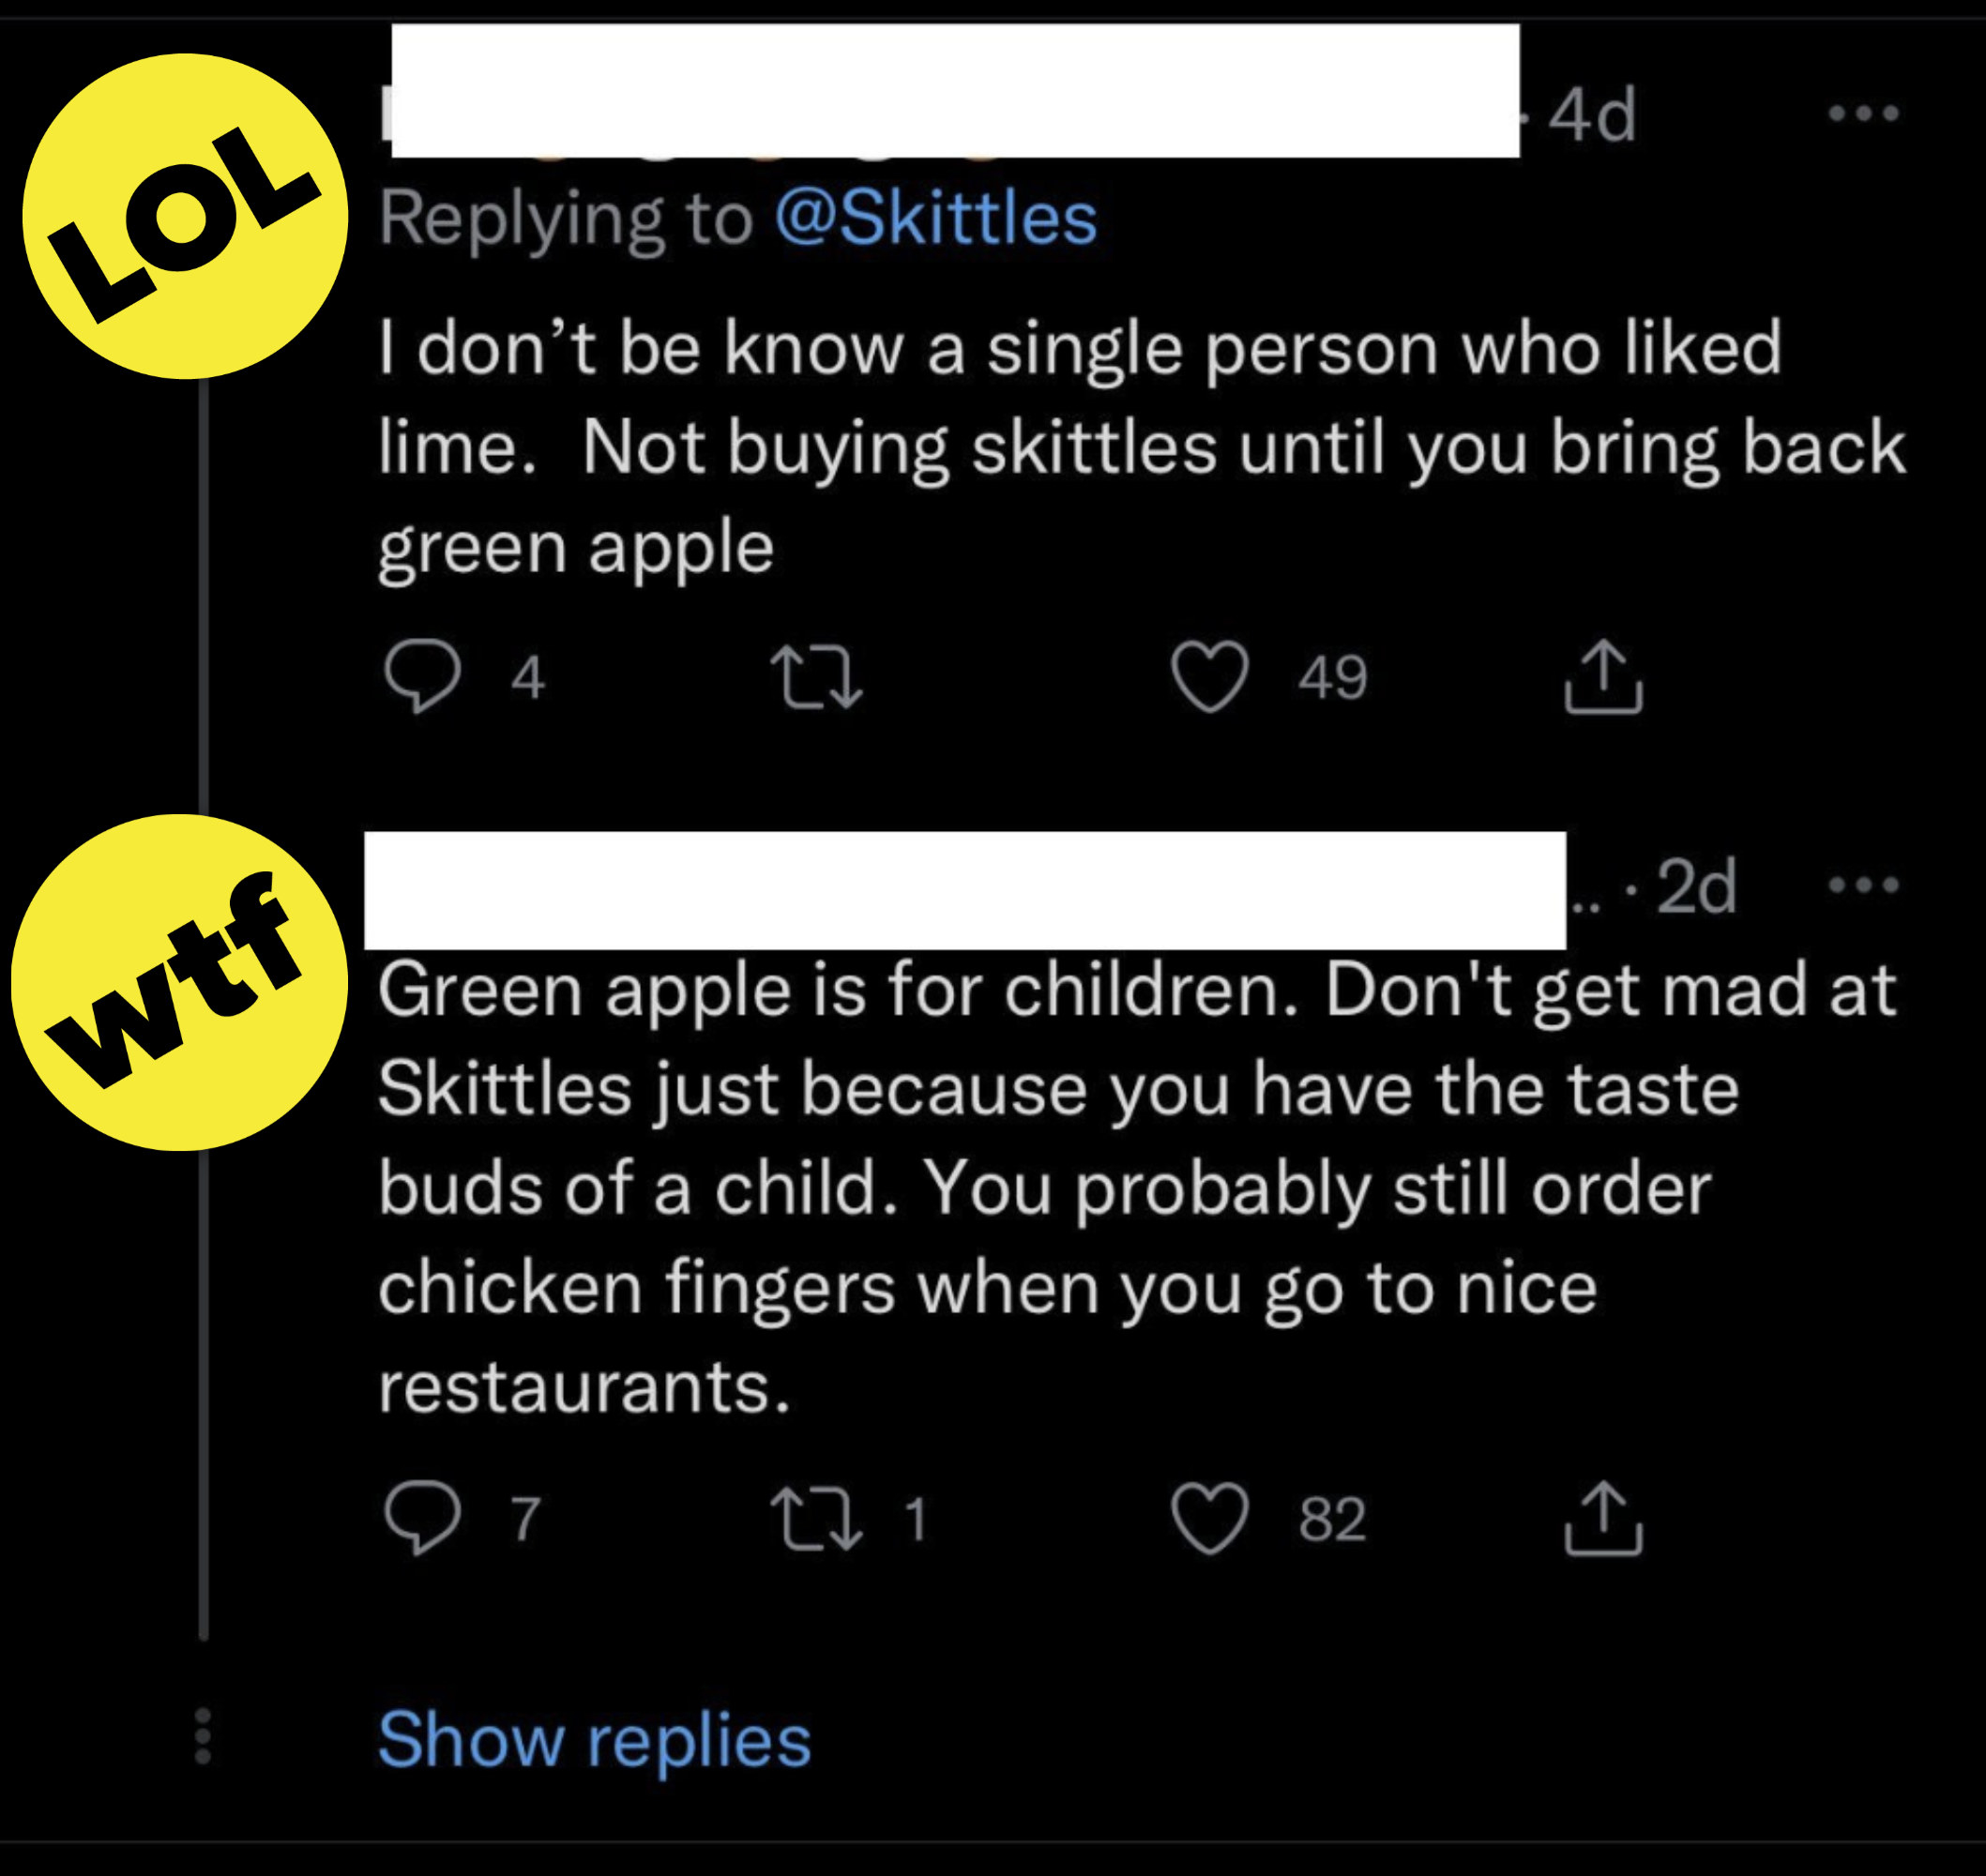 A person on Twitter saying green apple Skittles are for children and someone who likes them probably orders chicken fingers at nice restaurants